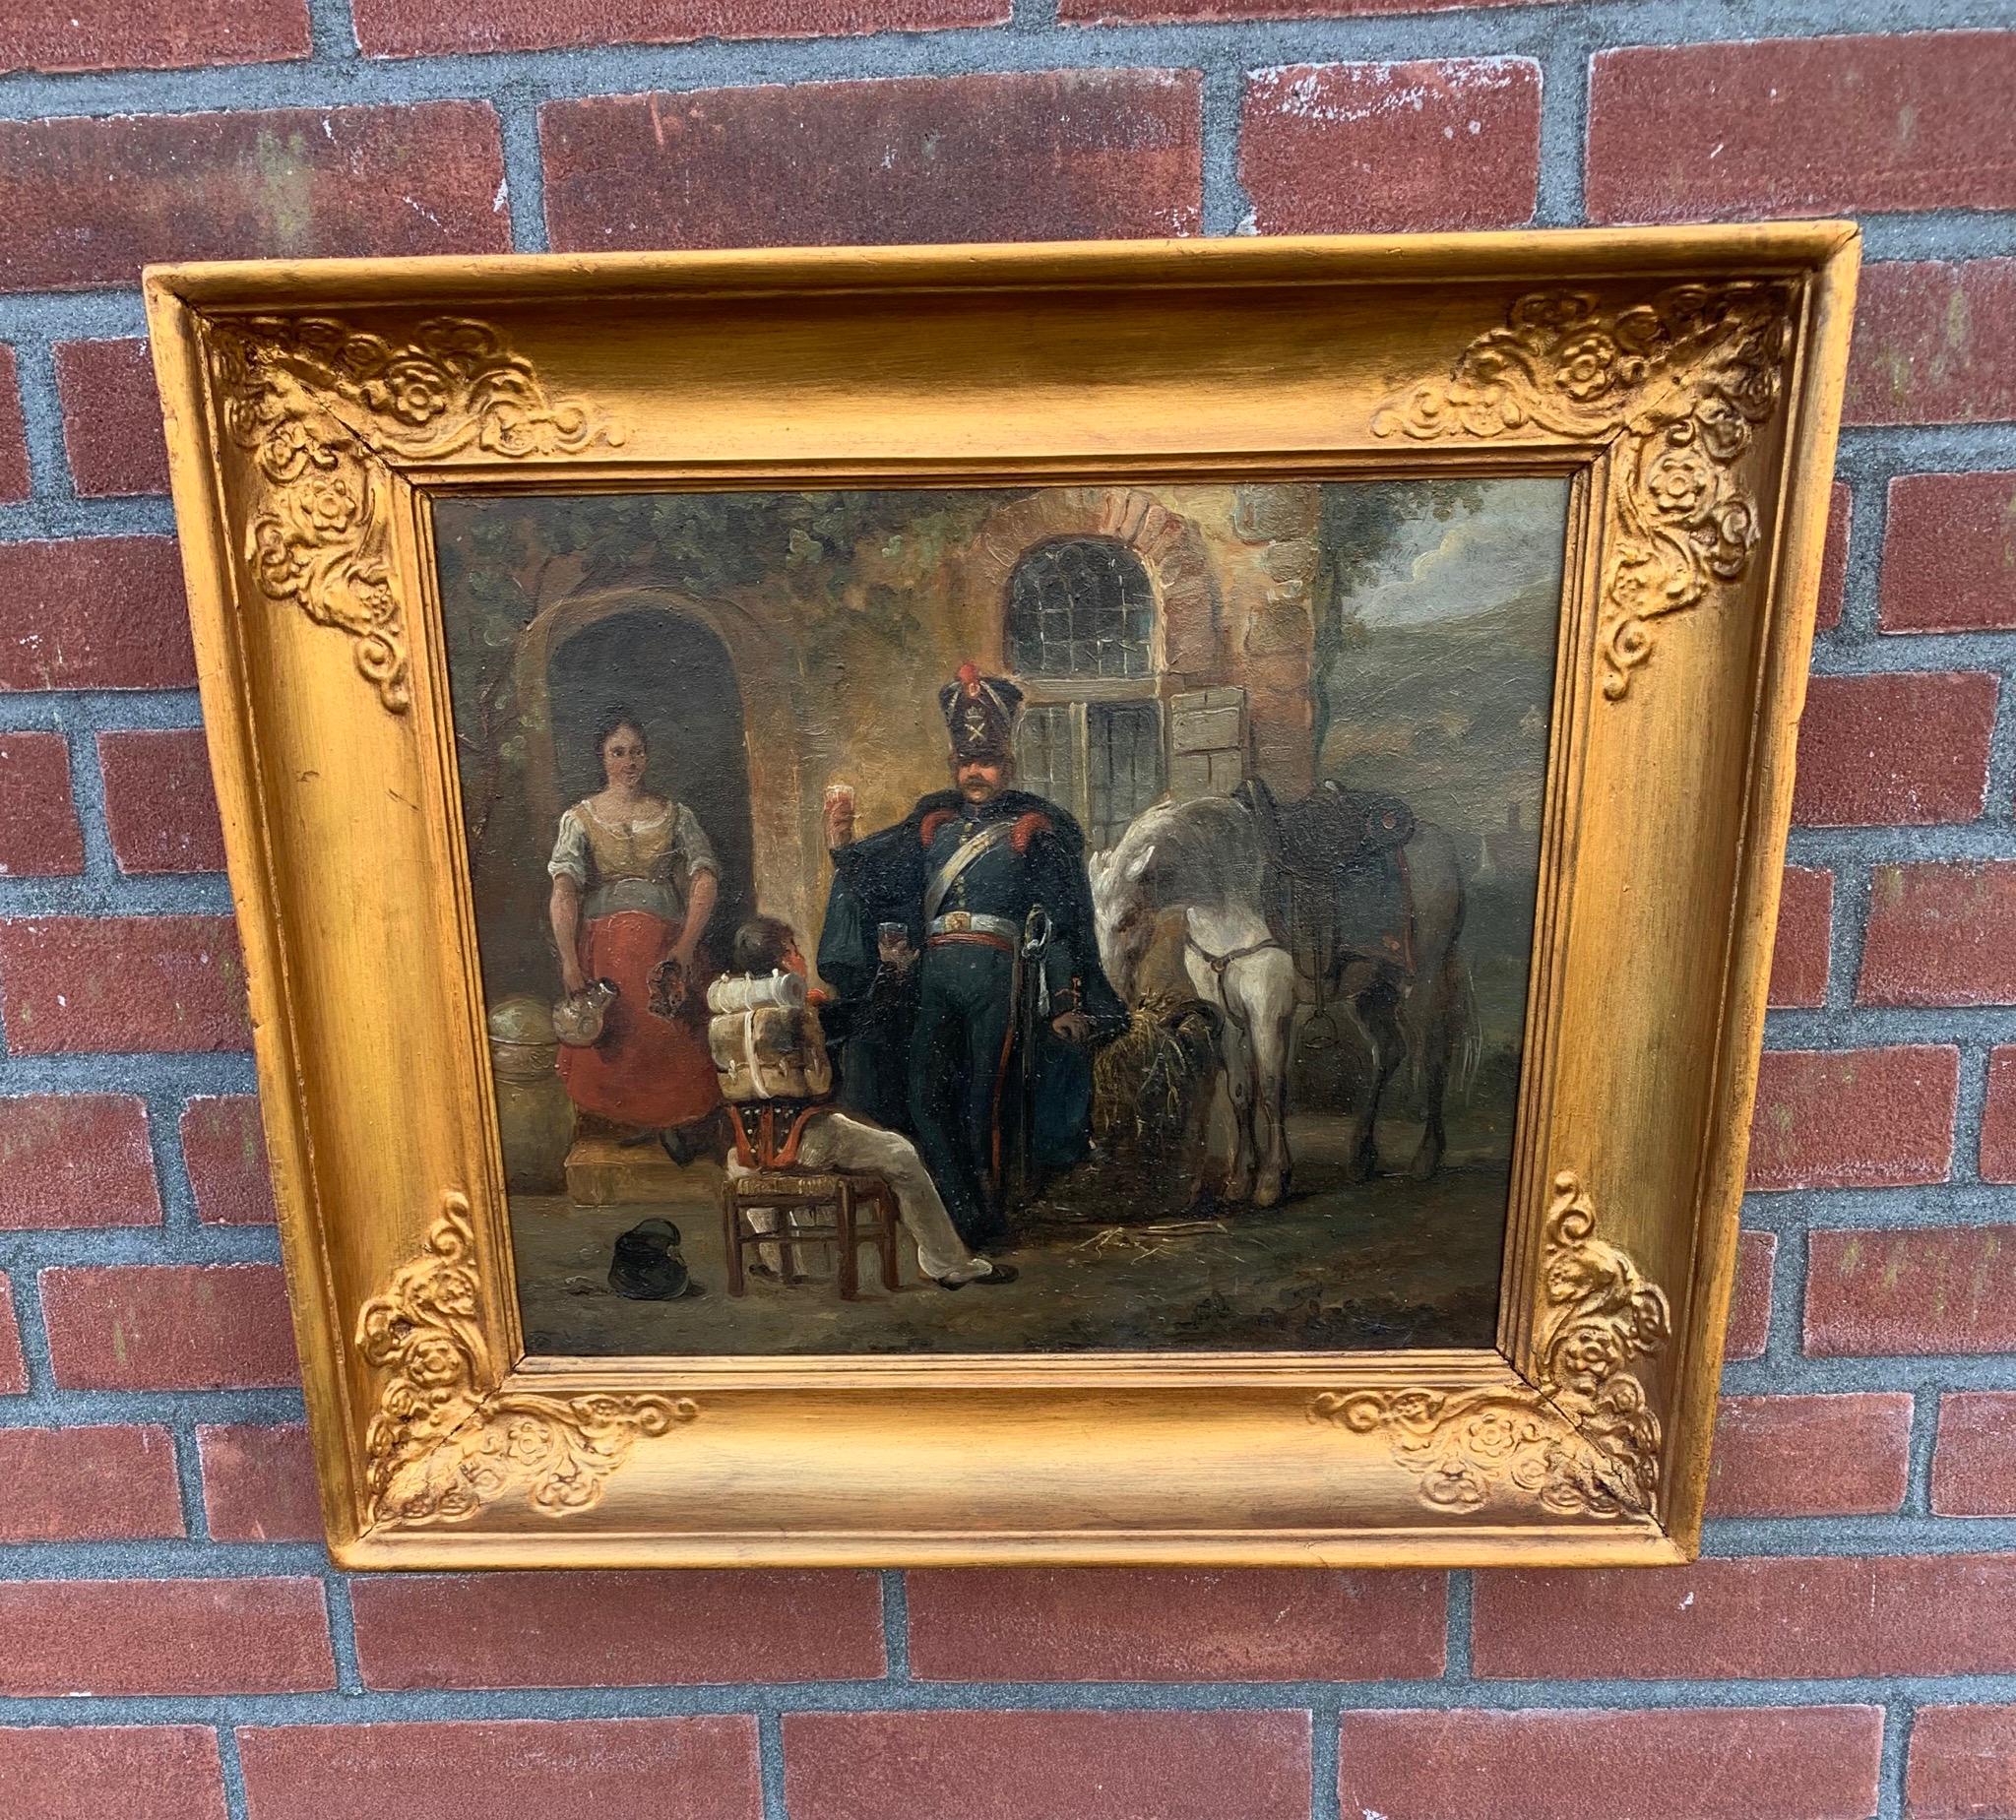 Early 19th century, Napoleonic period oil painting on an oak panel.

If you are looking for early 19th century, French art with a military topic then this romantic style rural scene could be perfect for you. This painting with all the period